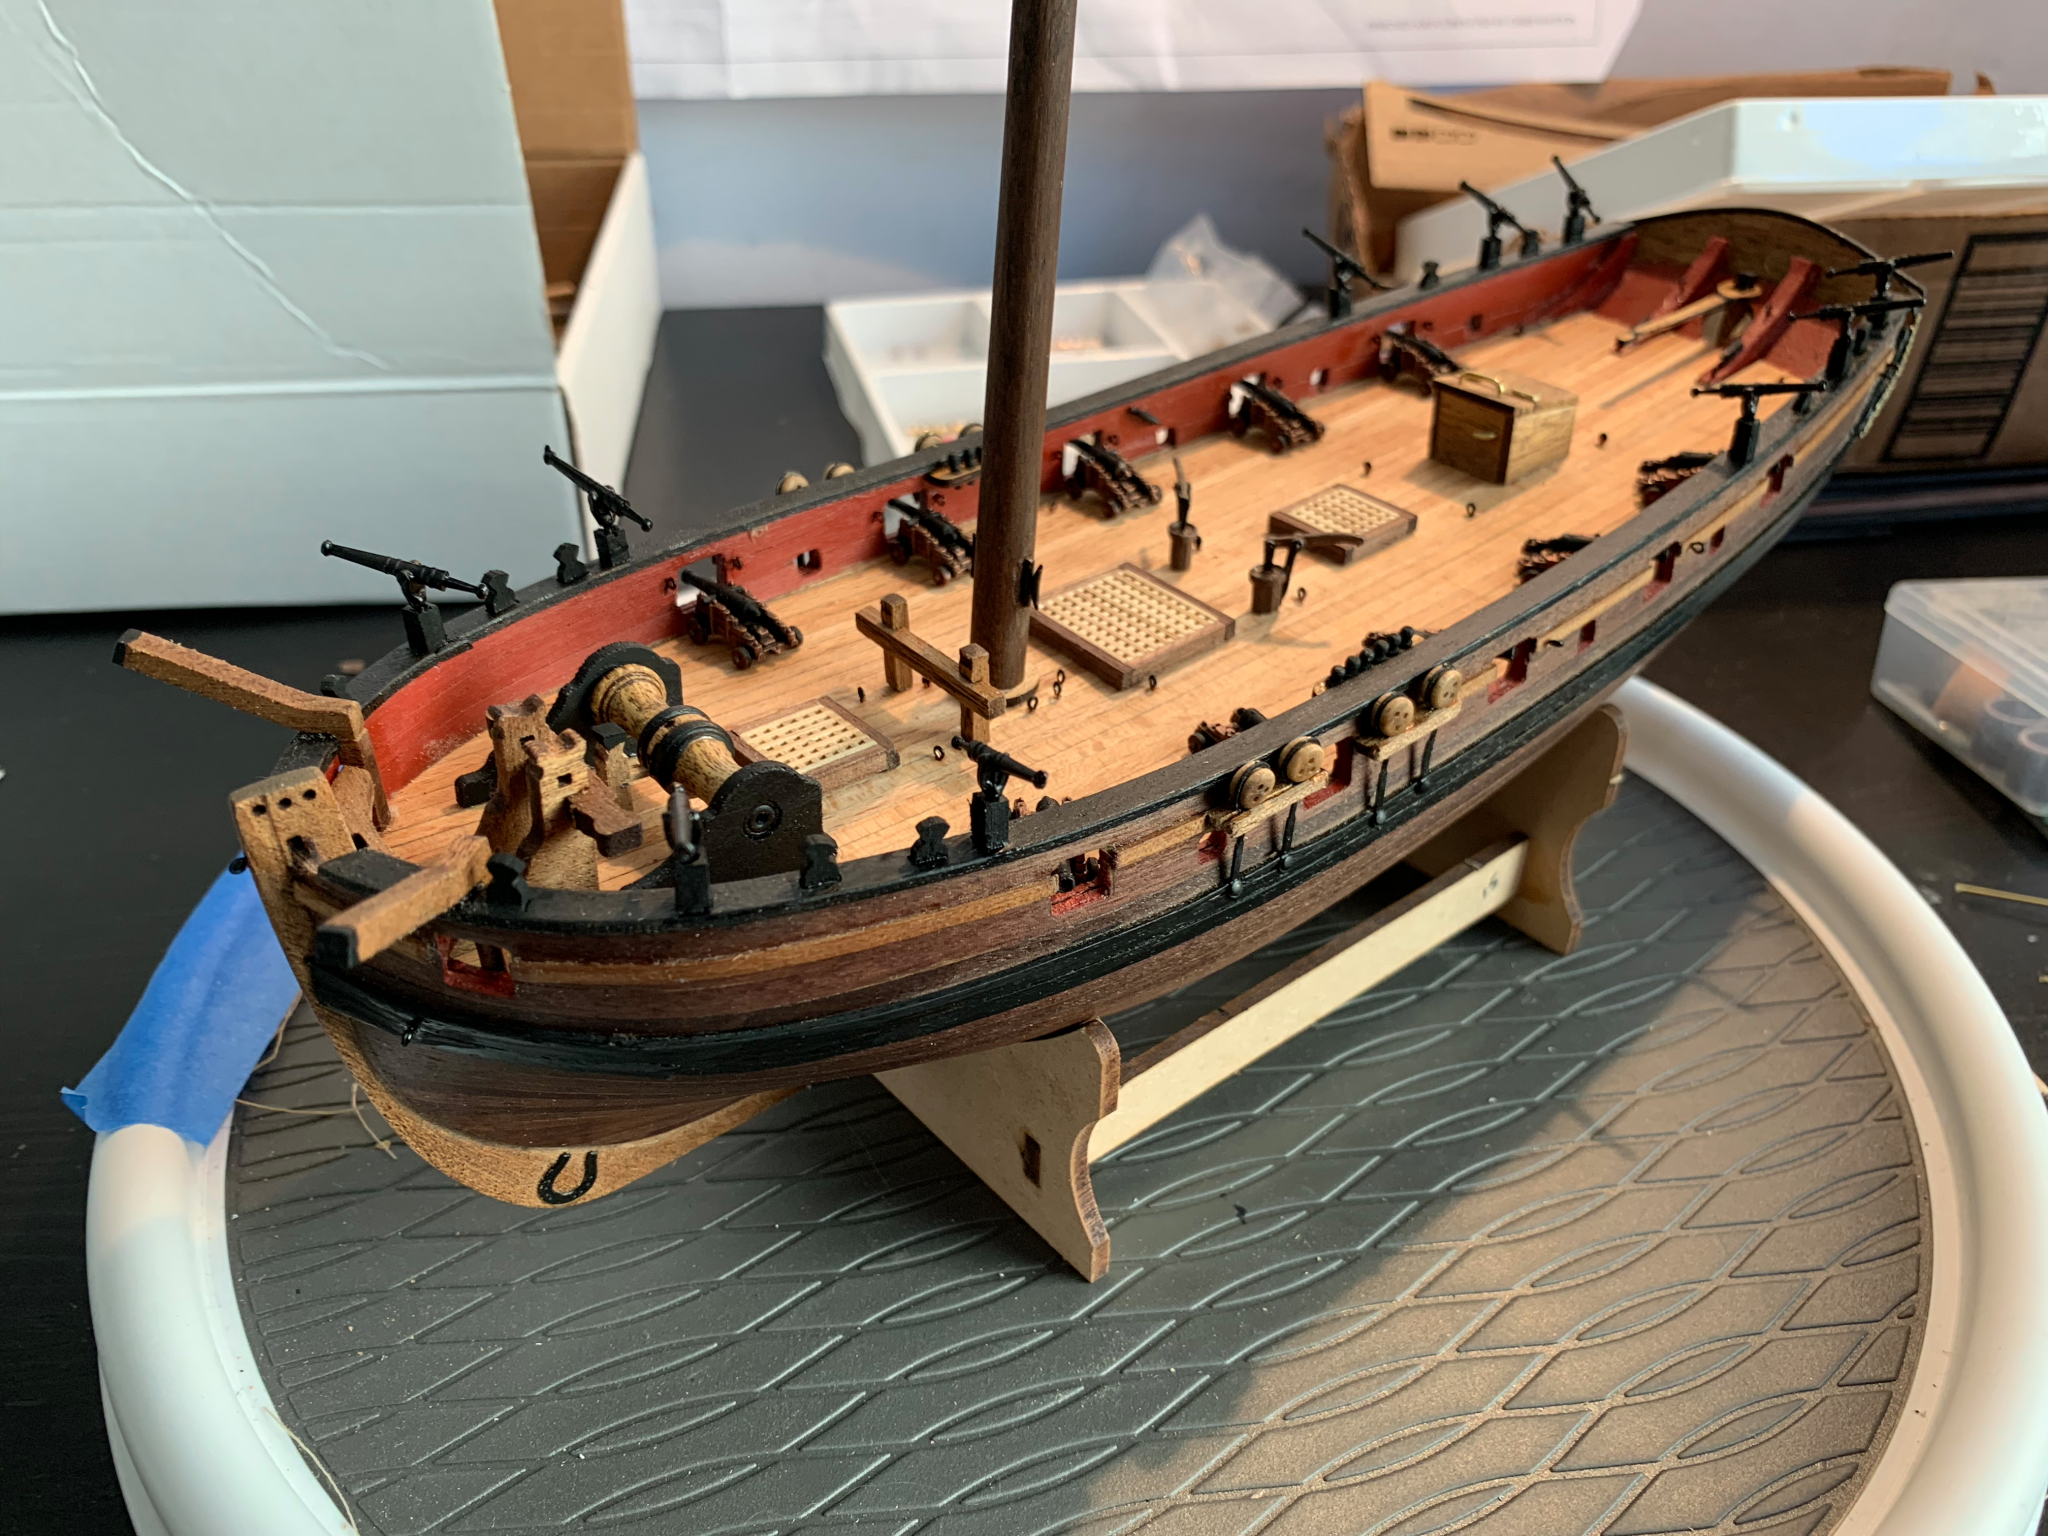 Amati Model - H.M. Cutter Lady Nelson - Victory Models by Amati